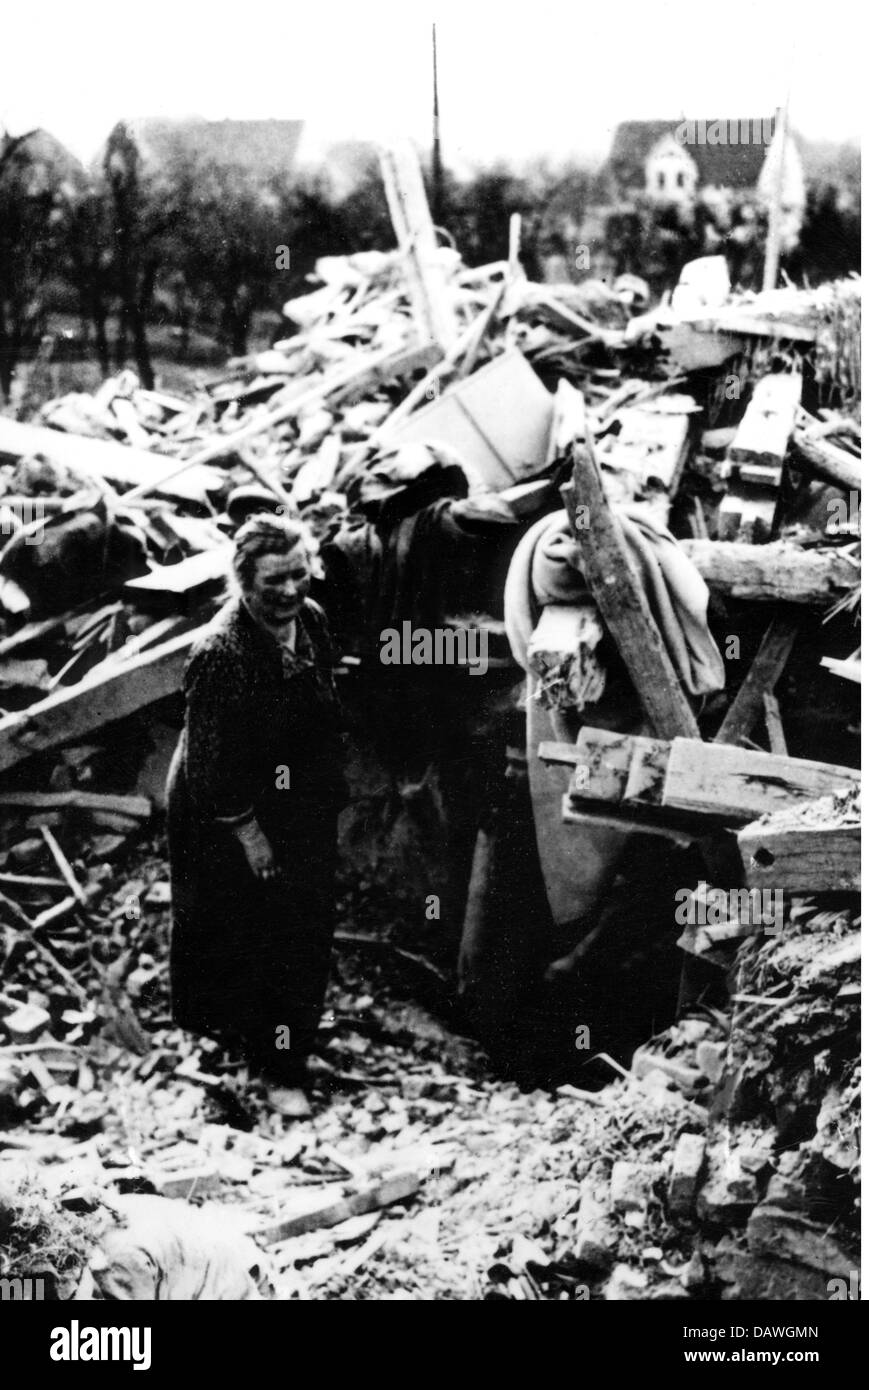 events, Second World War / WWII, Germany, woman in the remains of her house, 1945, Additional-Rights-Clearences-Not Available Stock Photo